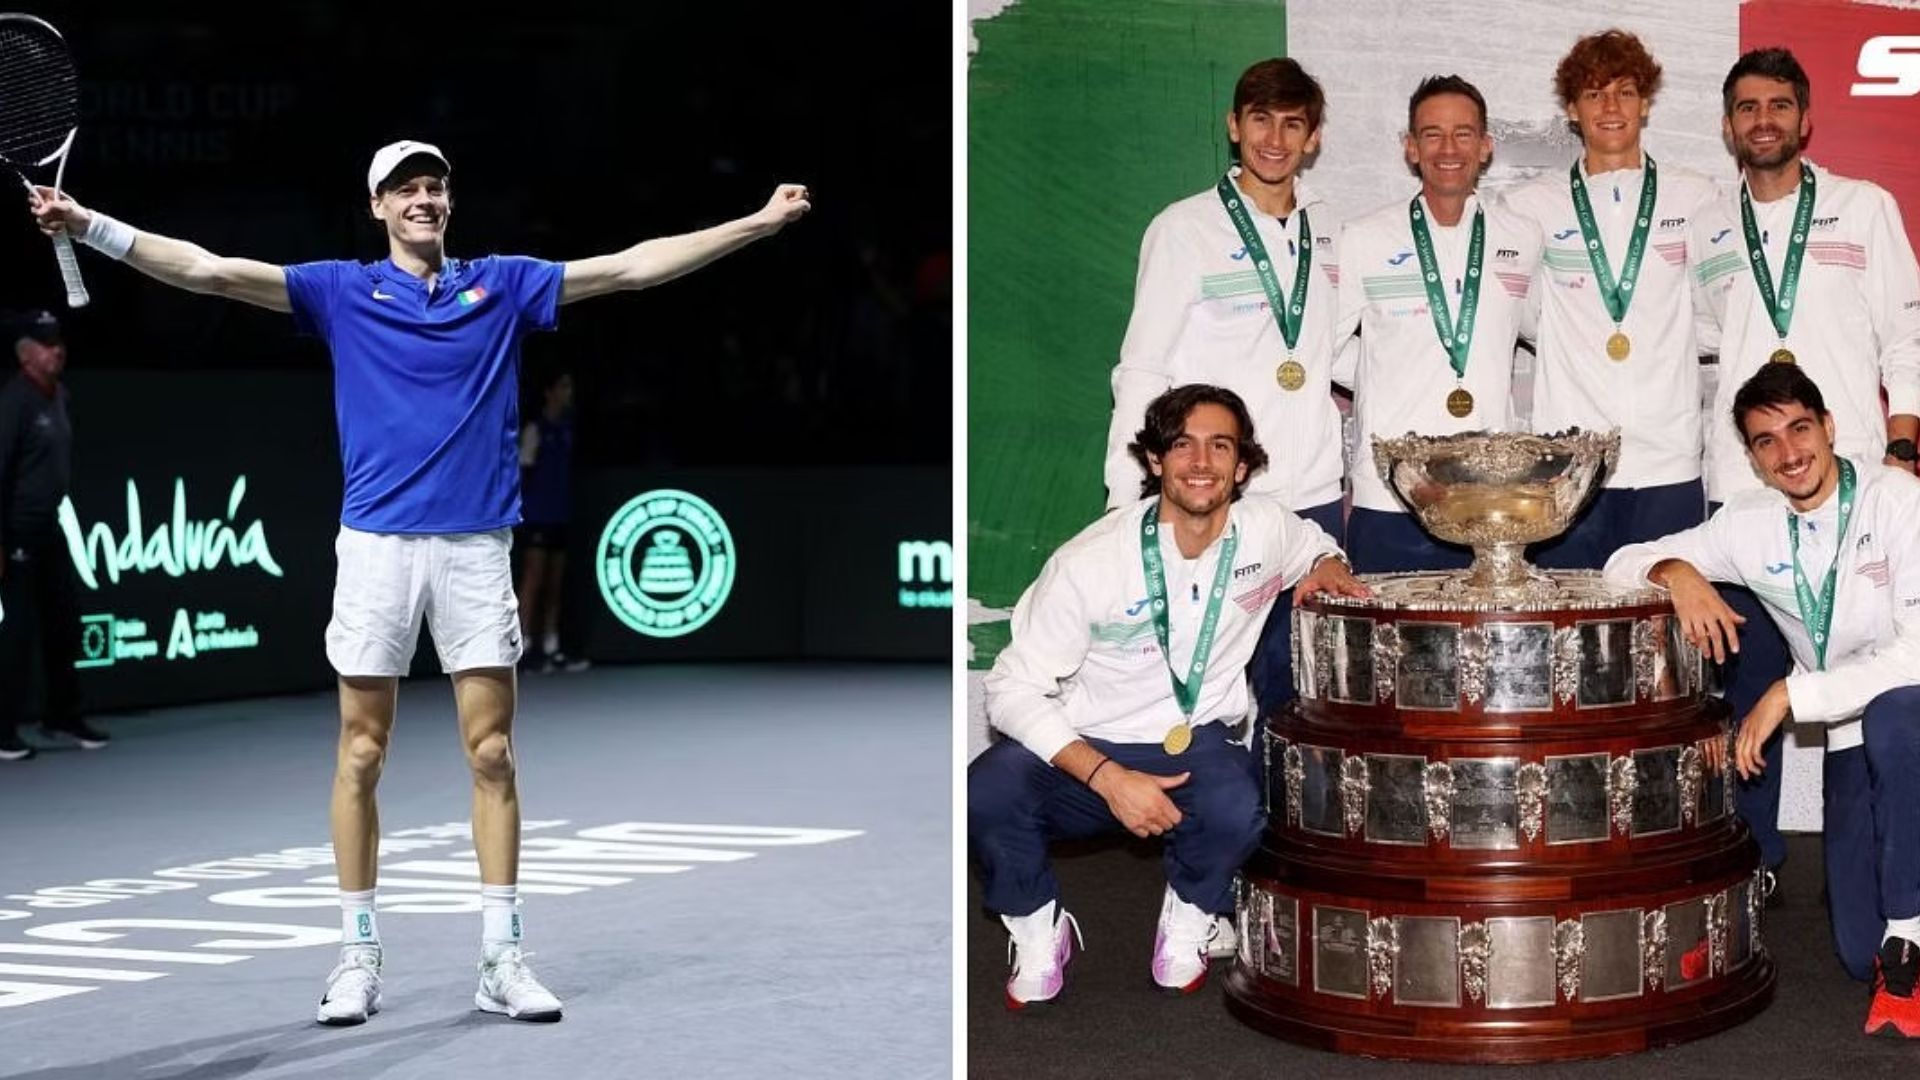 Jannik Sinner is the second-best player in the world right now - Tennis fans react to Italy lifting the 2023 Davis Cup